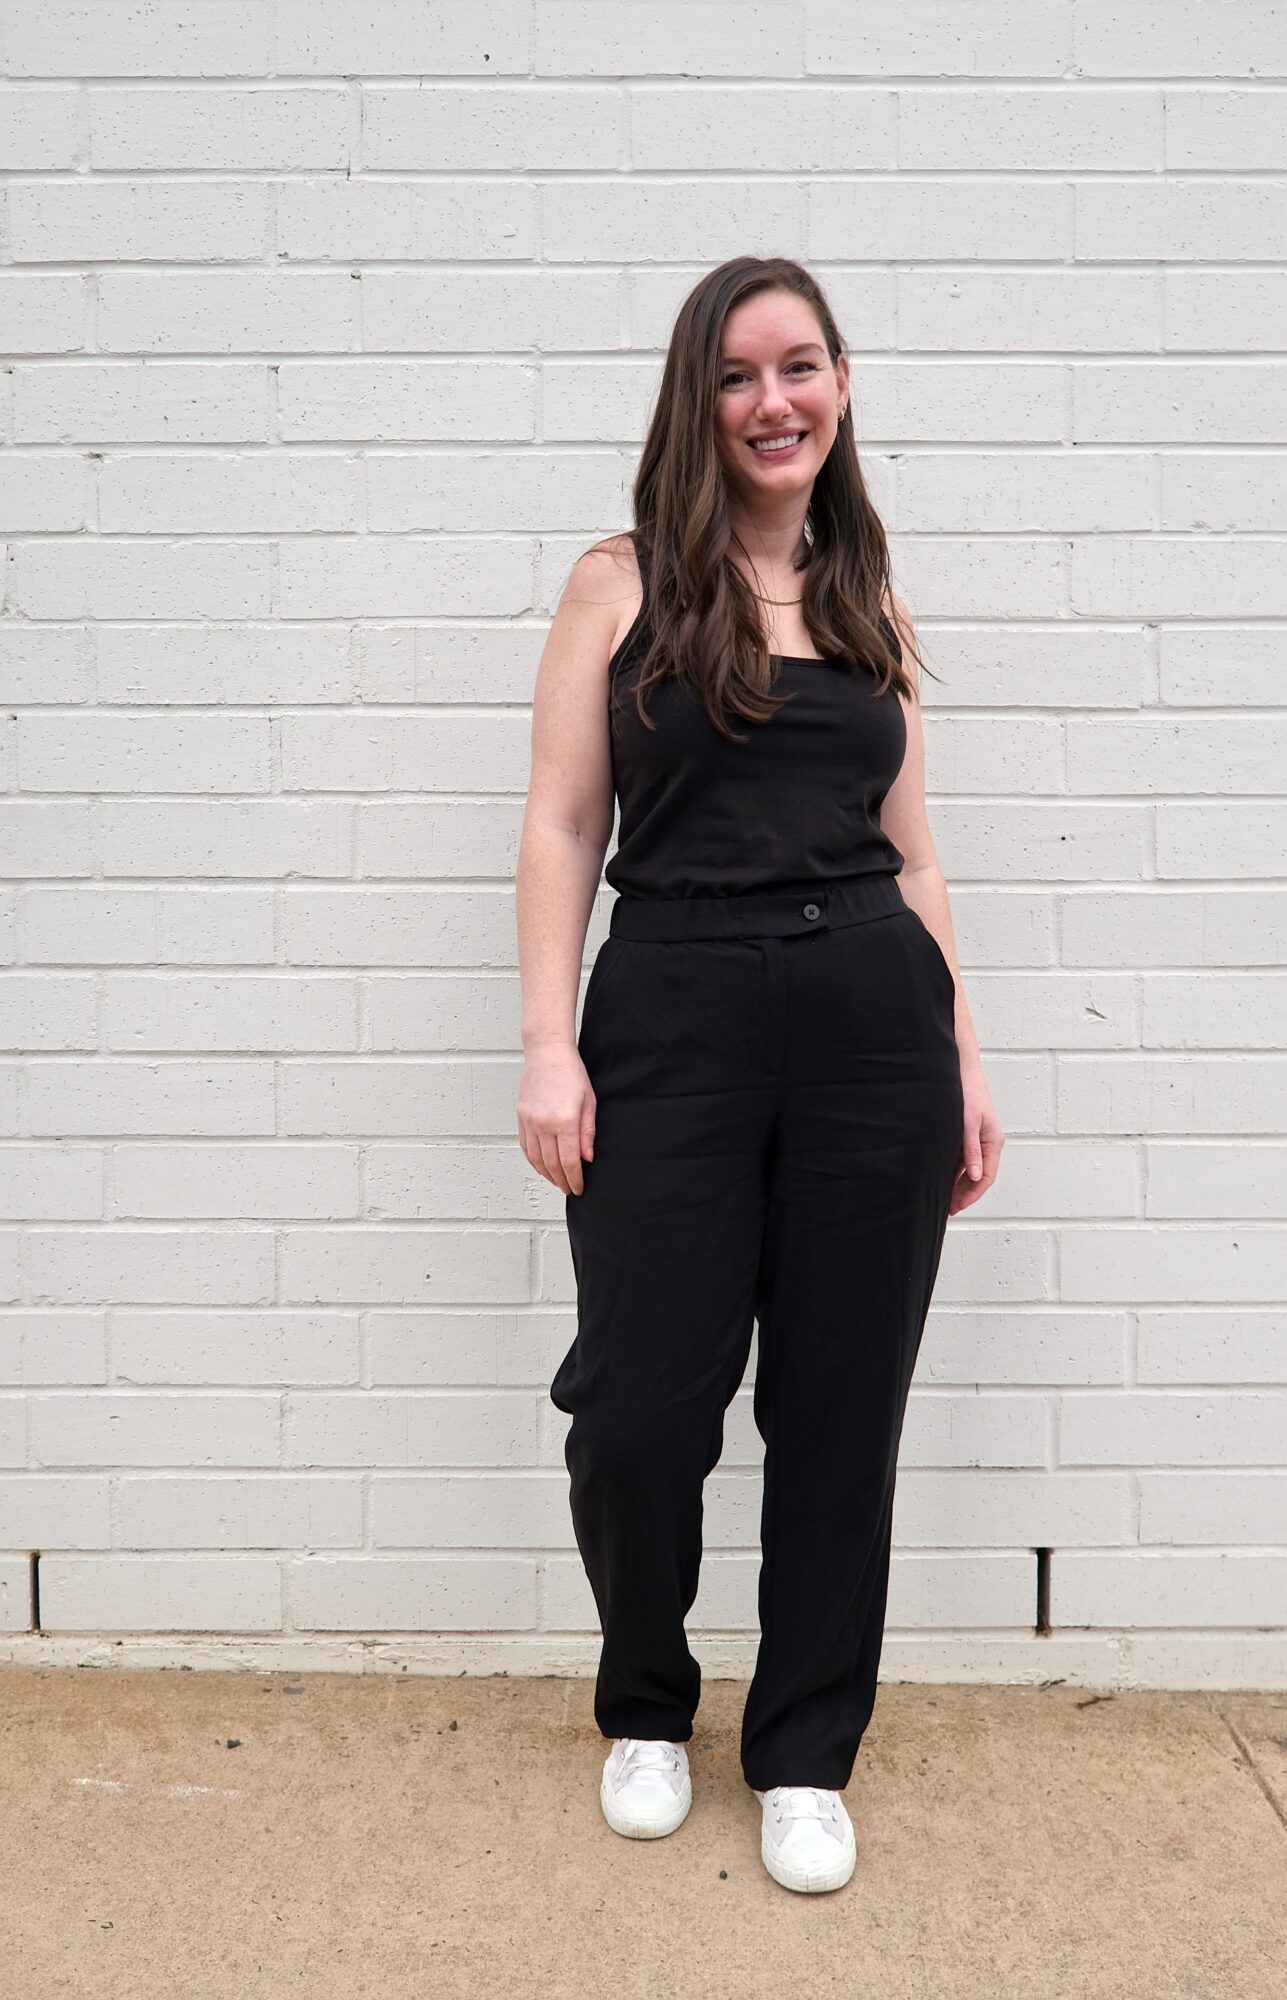 Alyssa wears the All Day Cigarette Pants with a black tank